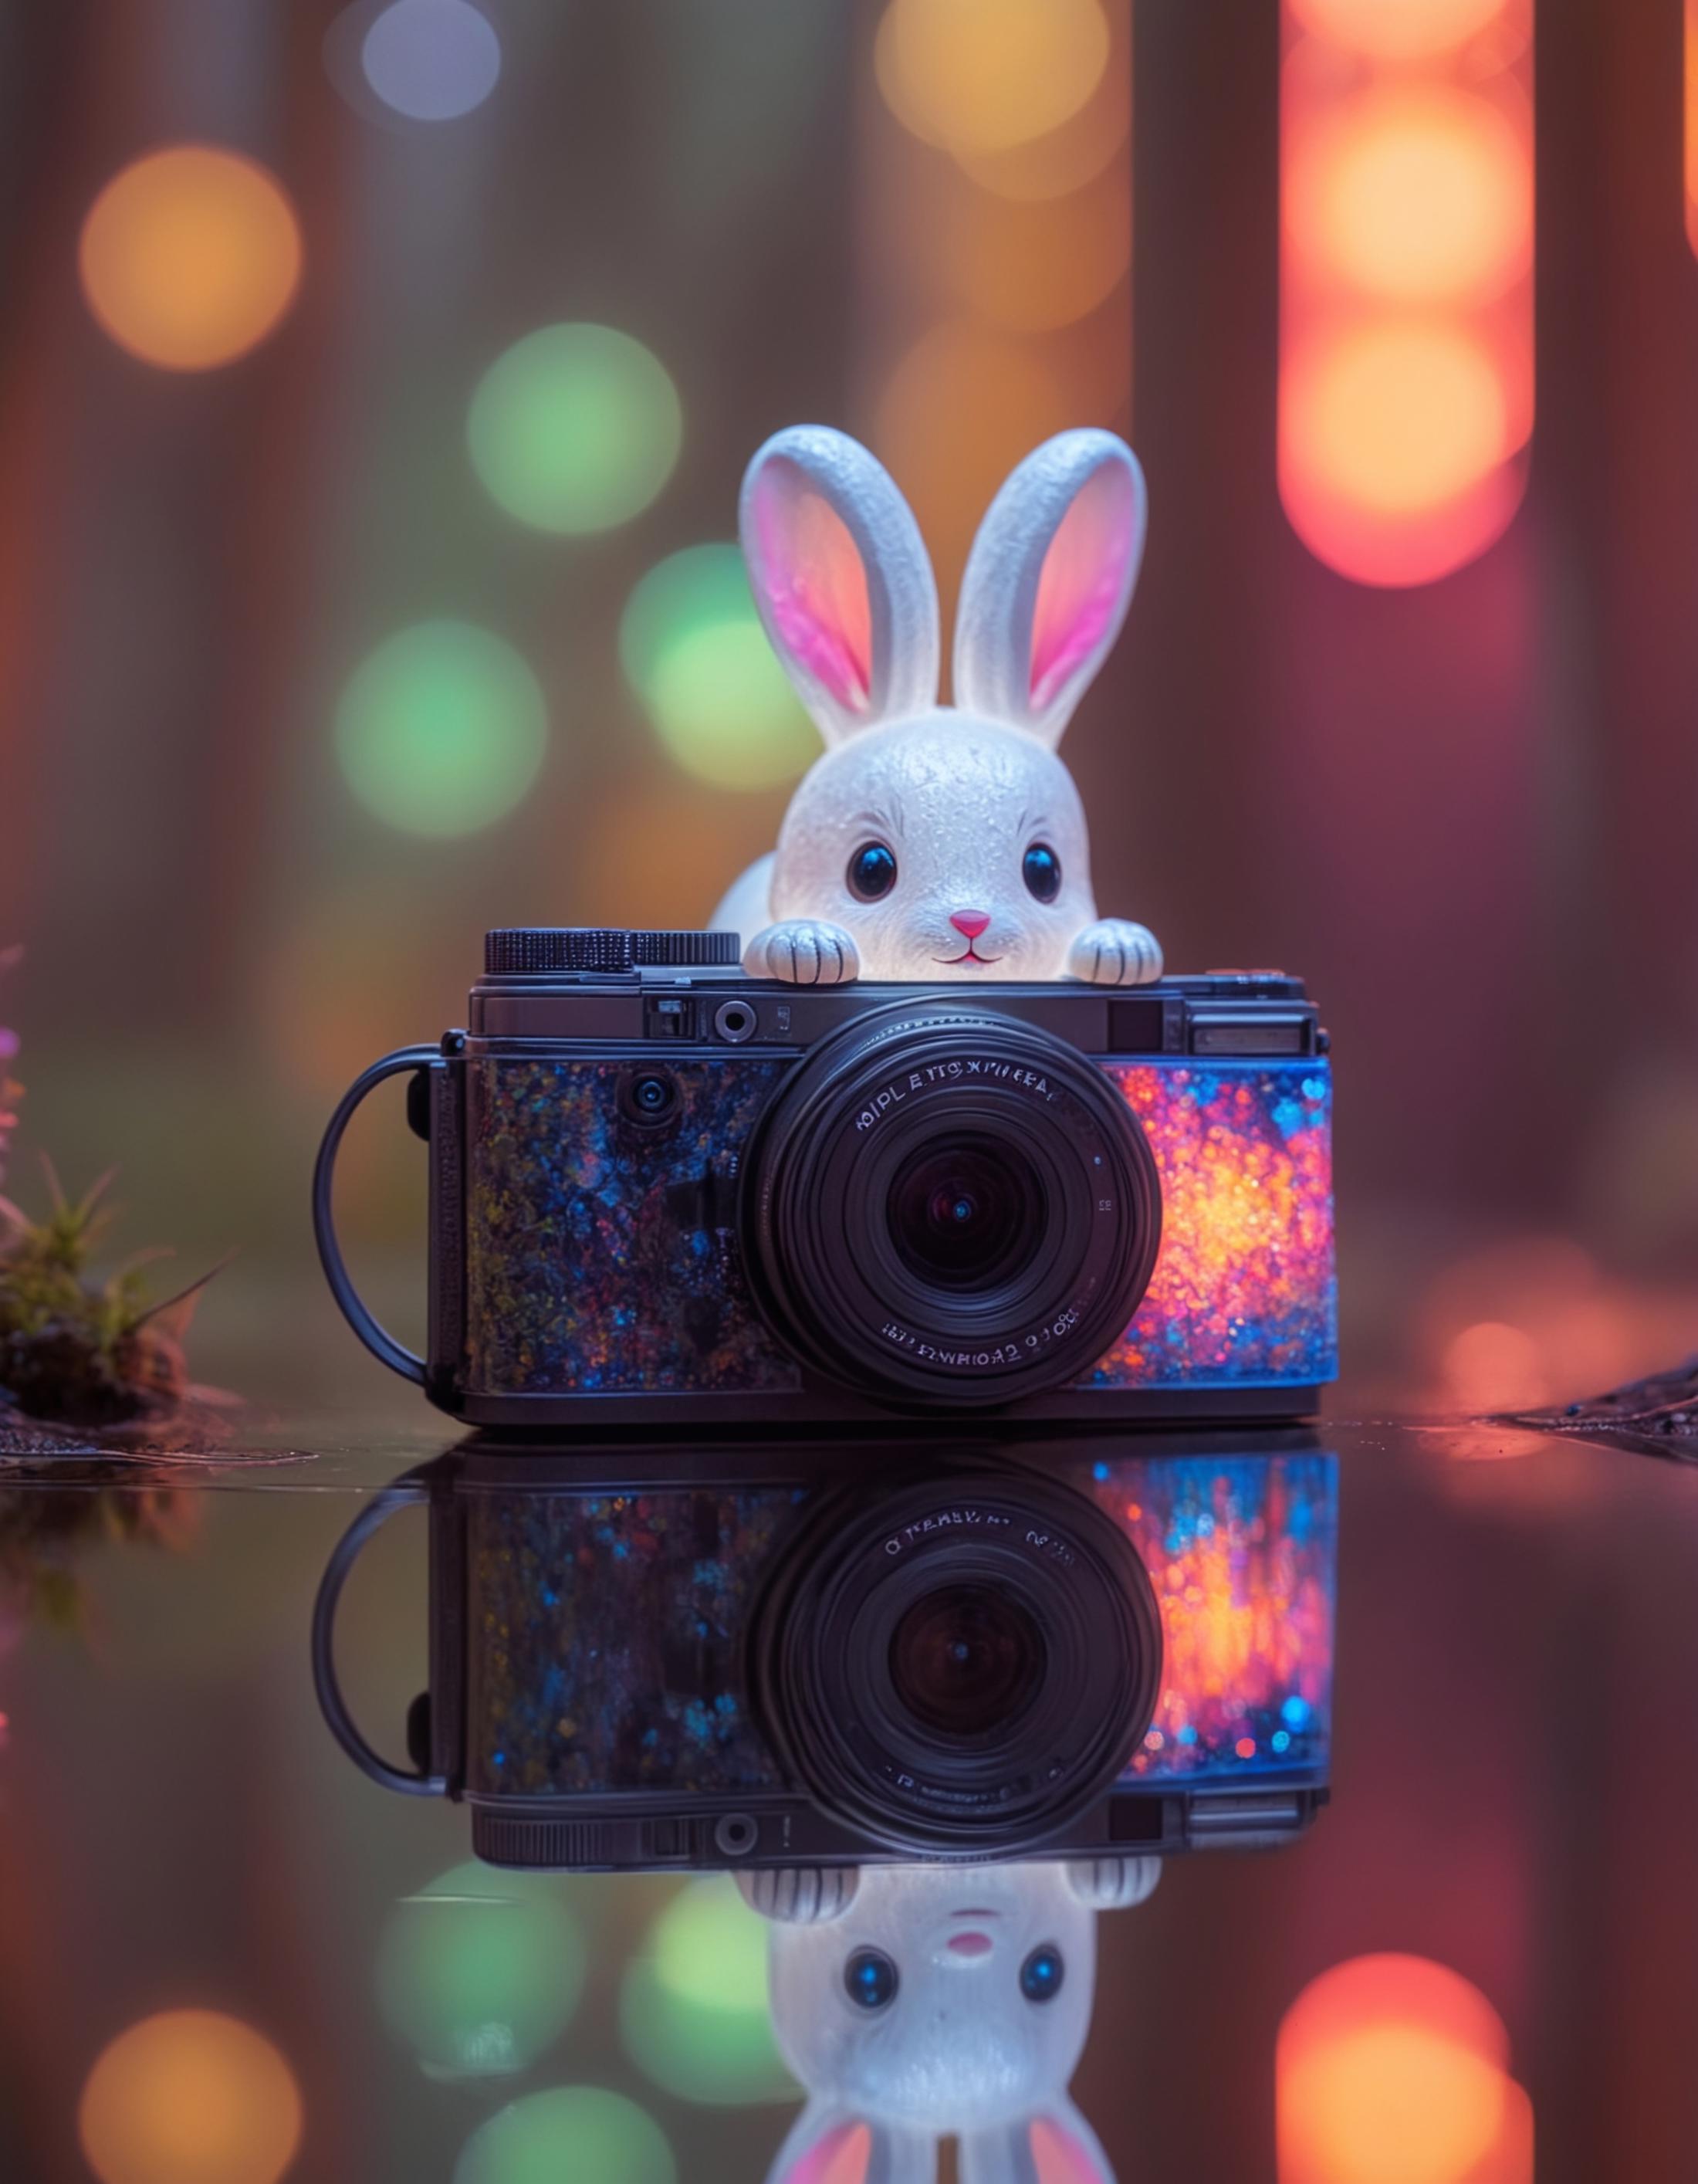 A Small White Bunny Peeking Out From Behind a Camera